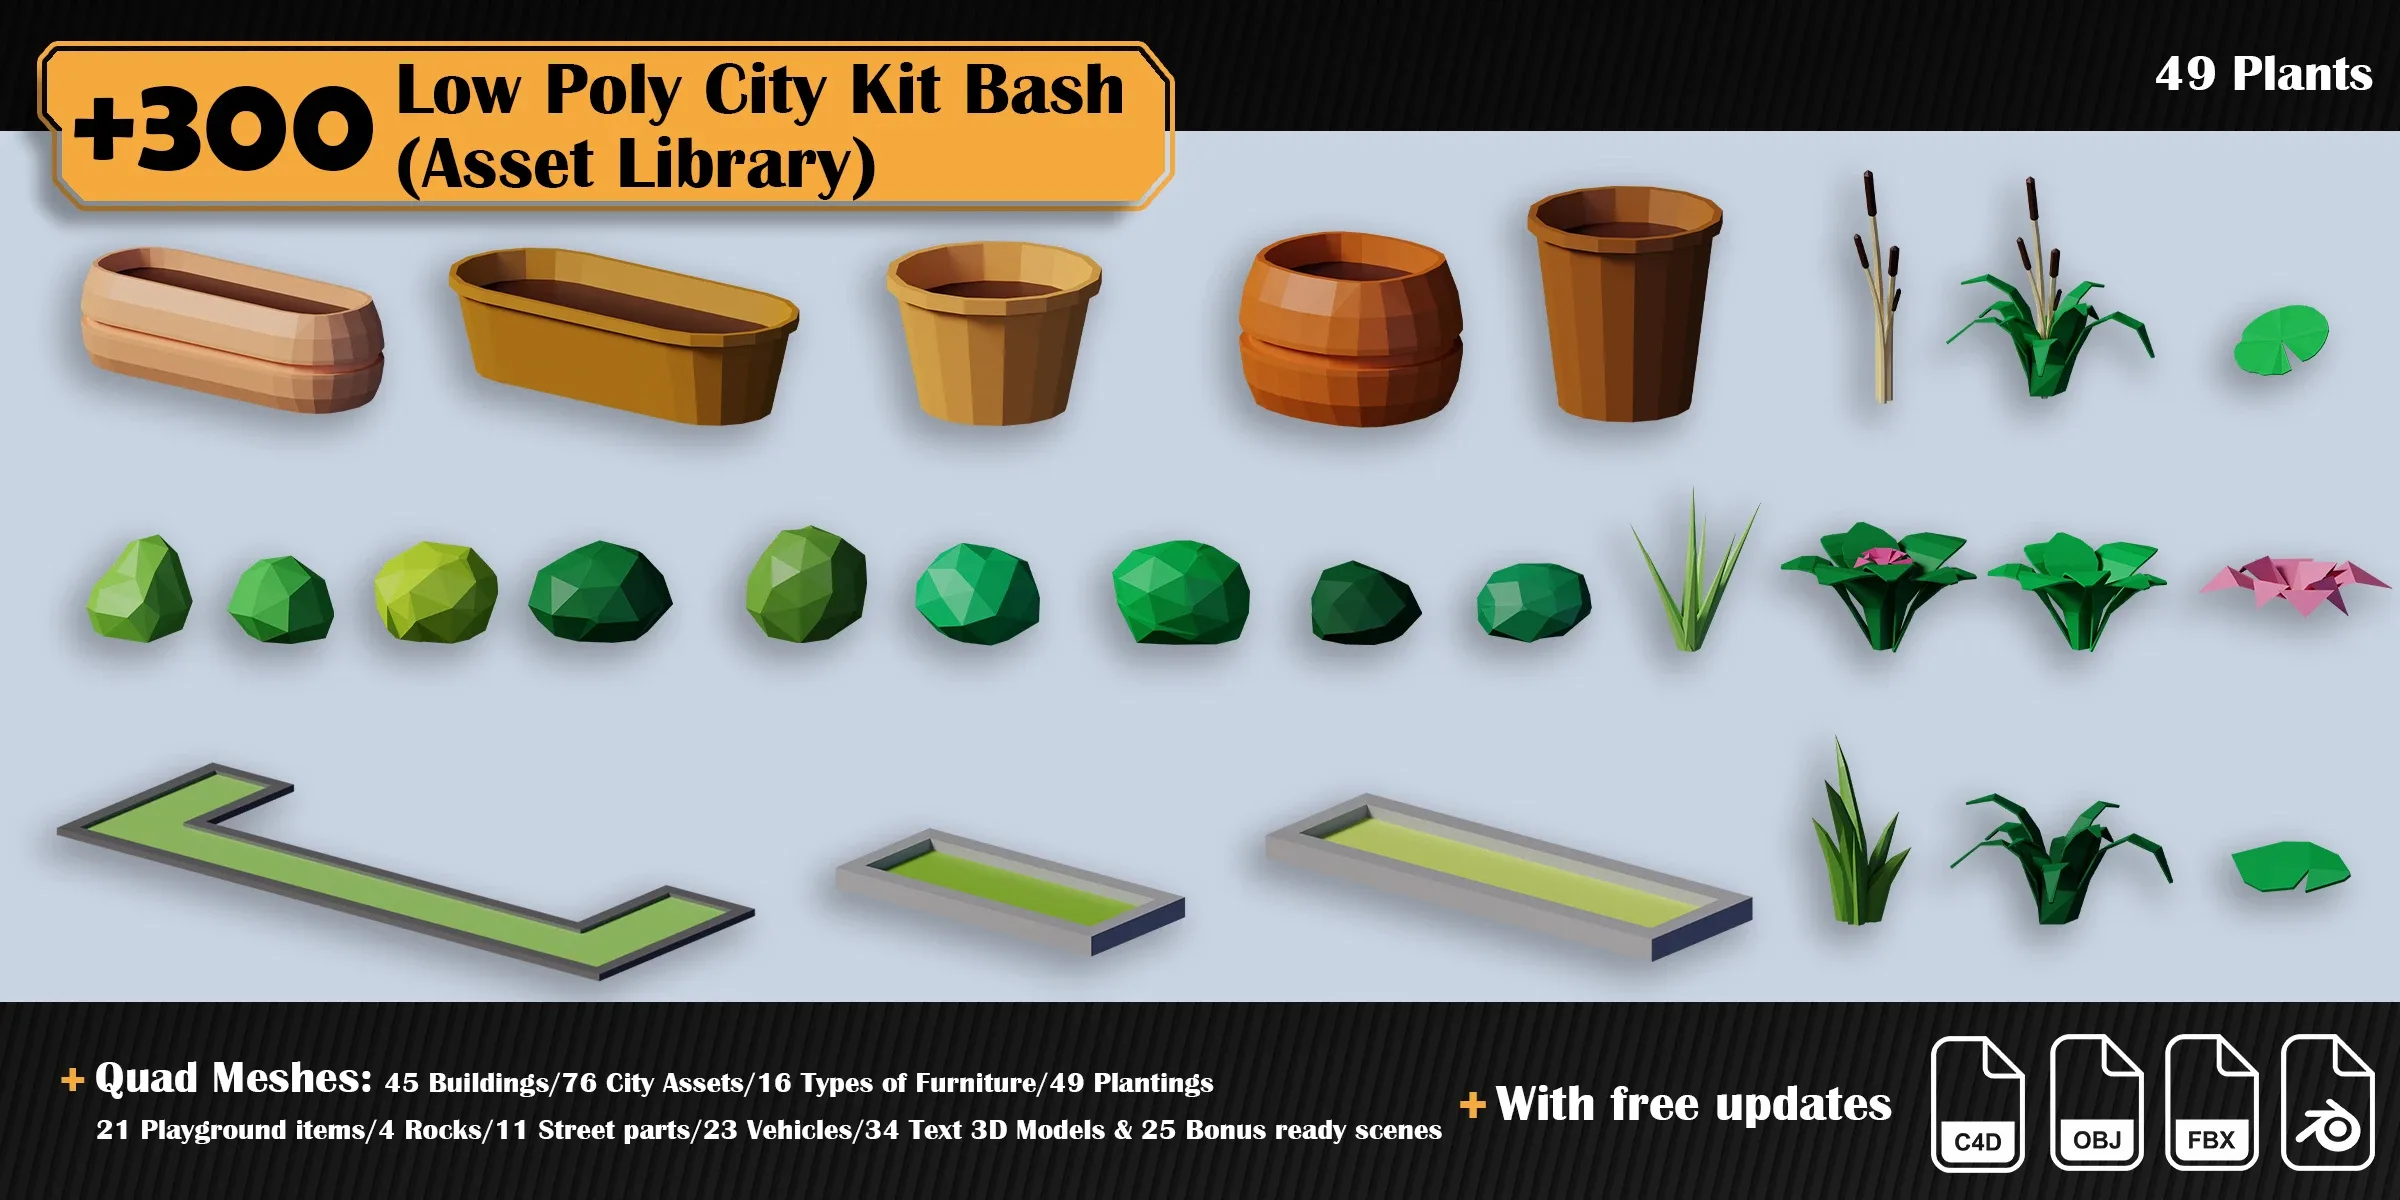 Low Poly City Asset Library Kitbash (+300 Objects)